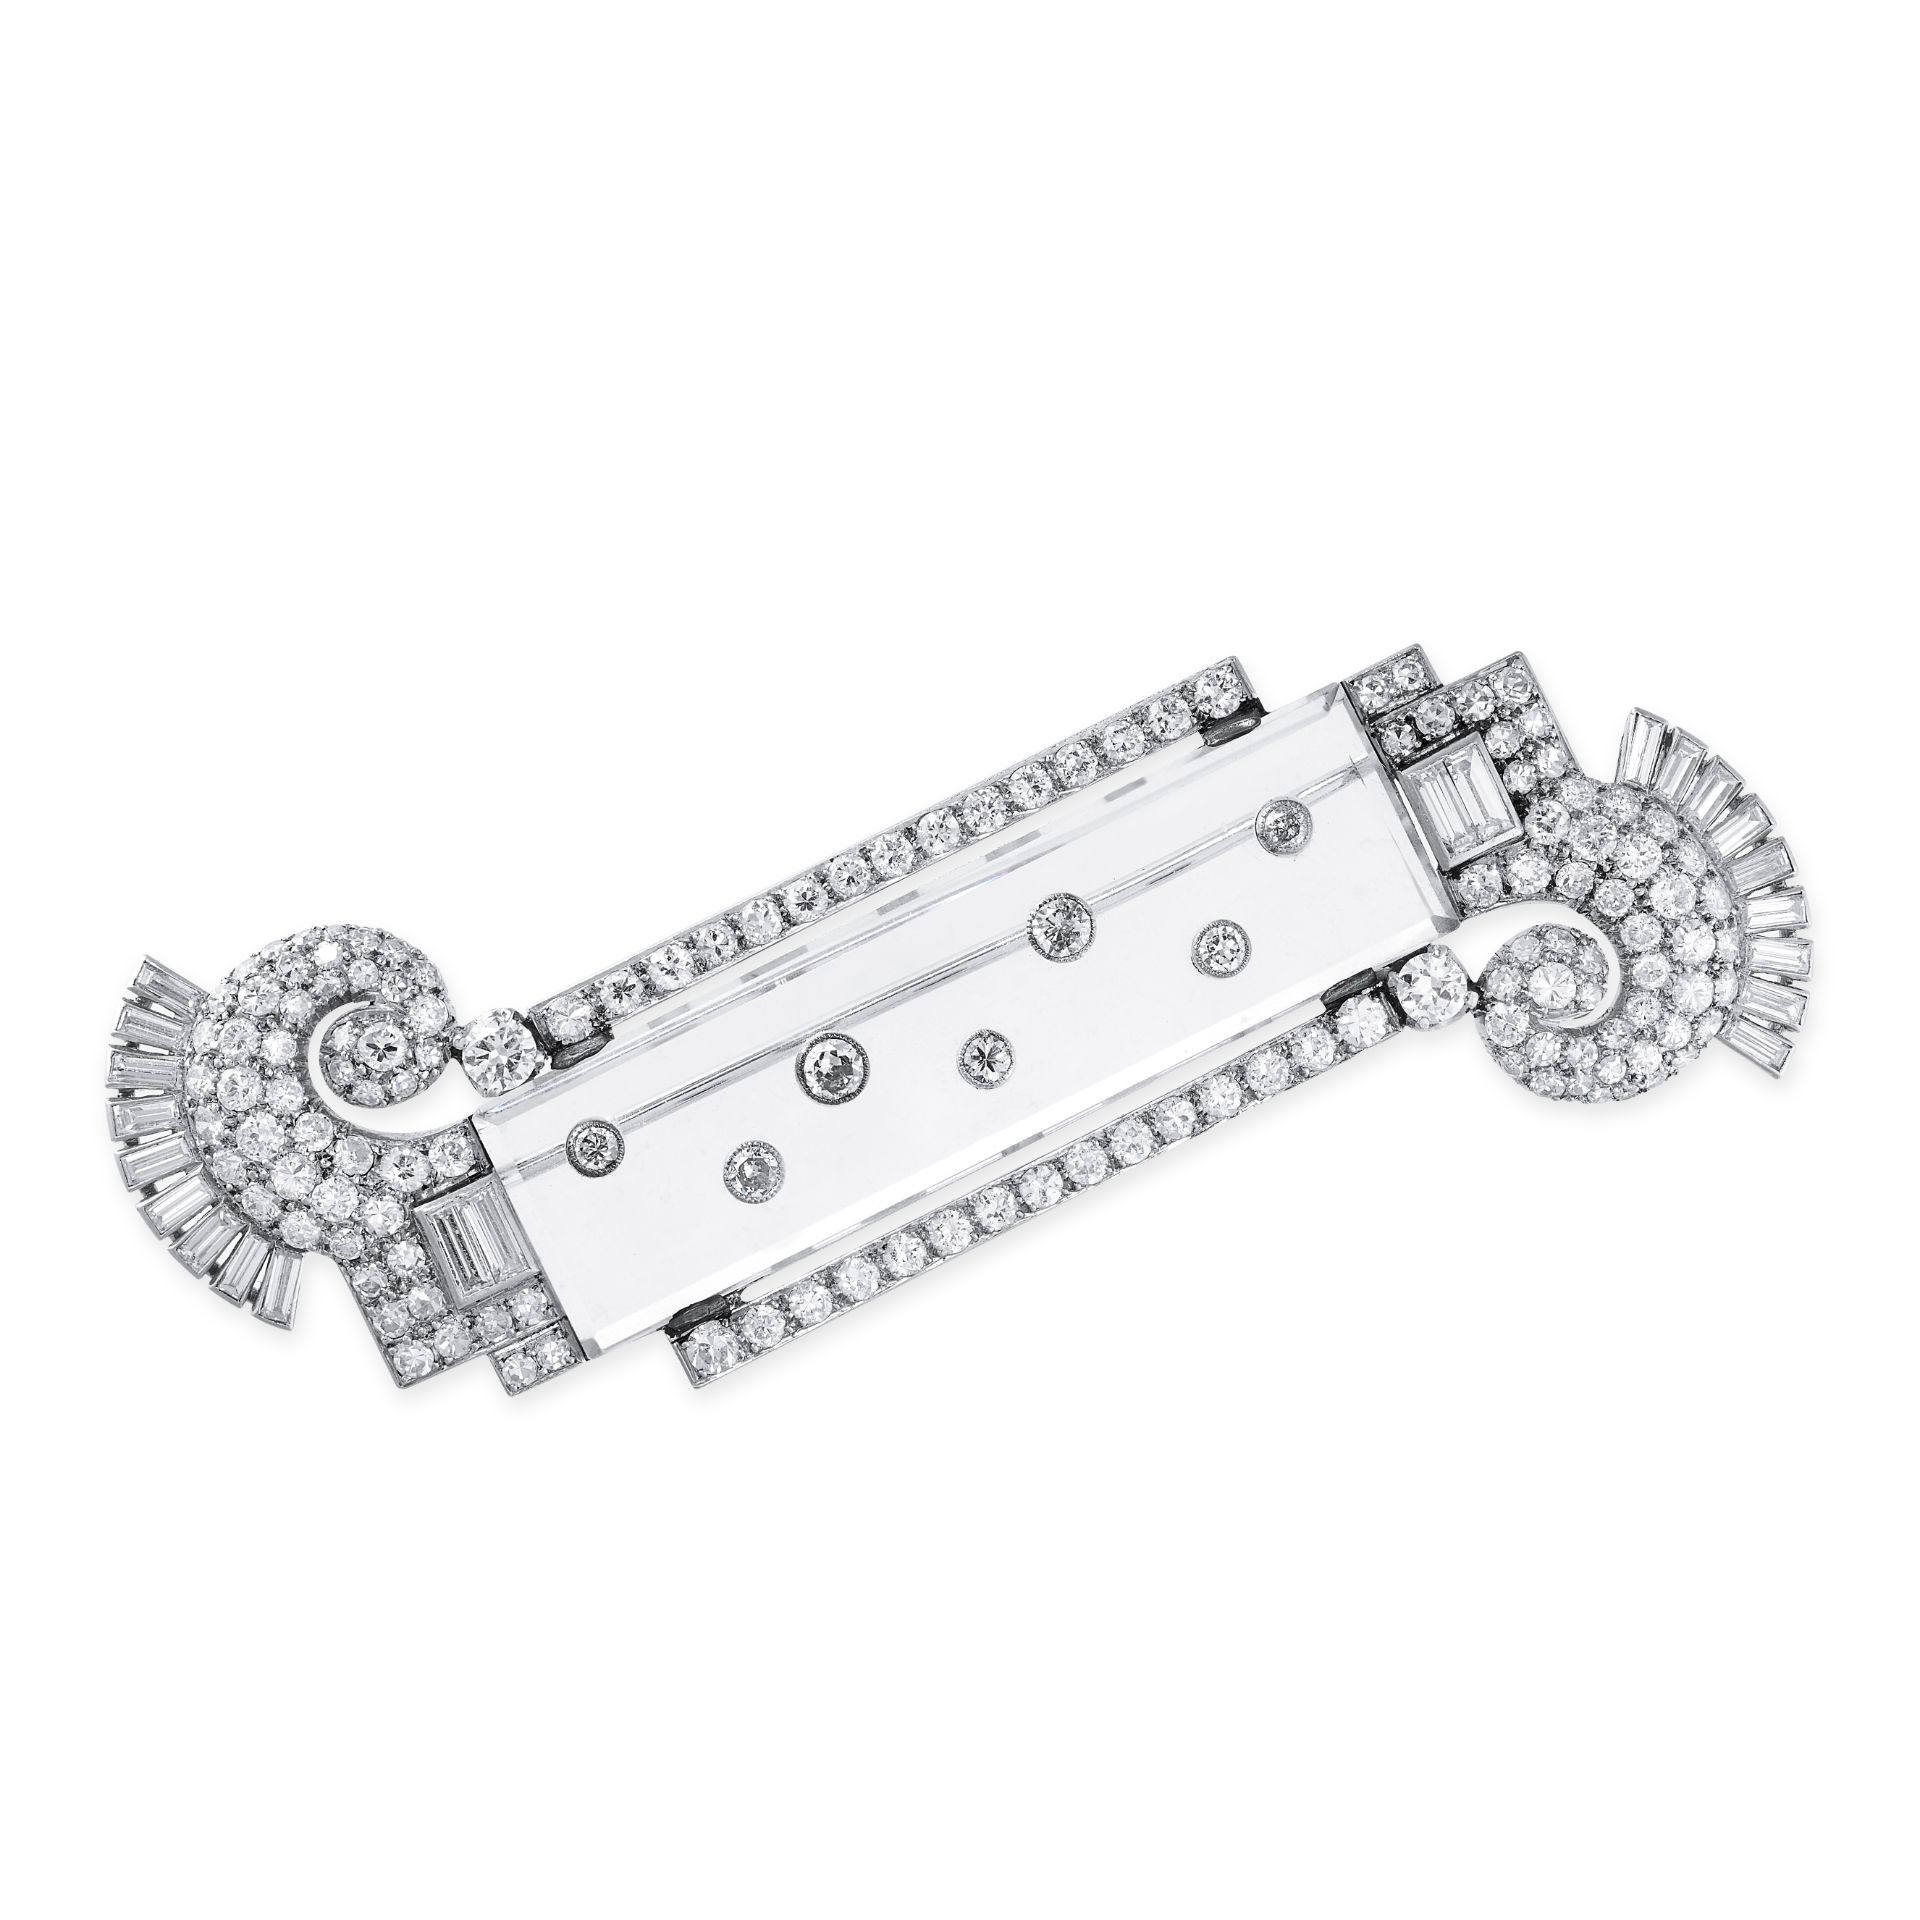 AN ART DECO ROCK CRYSTAL AND DIAMOND BROOCH, VAN CLEEF & ARPELS the body set with a single